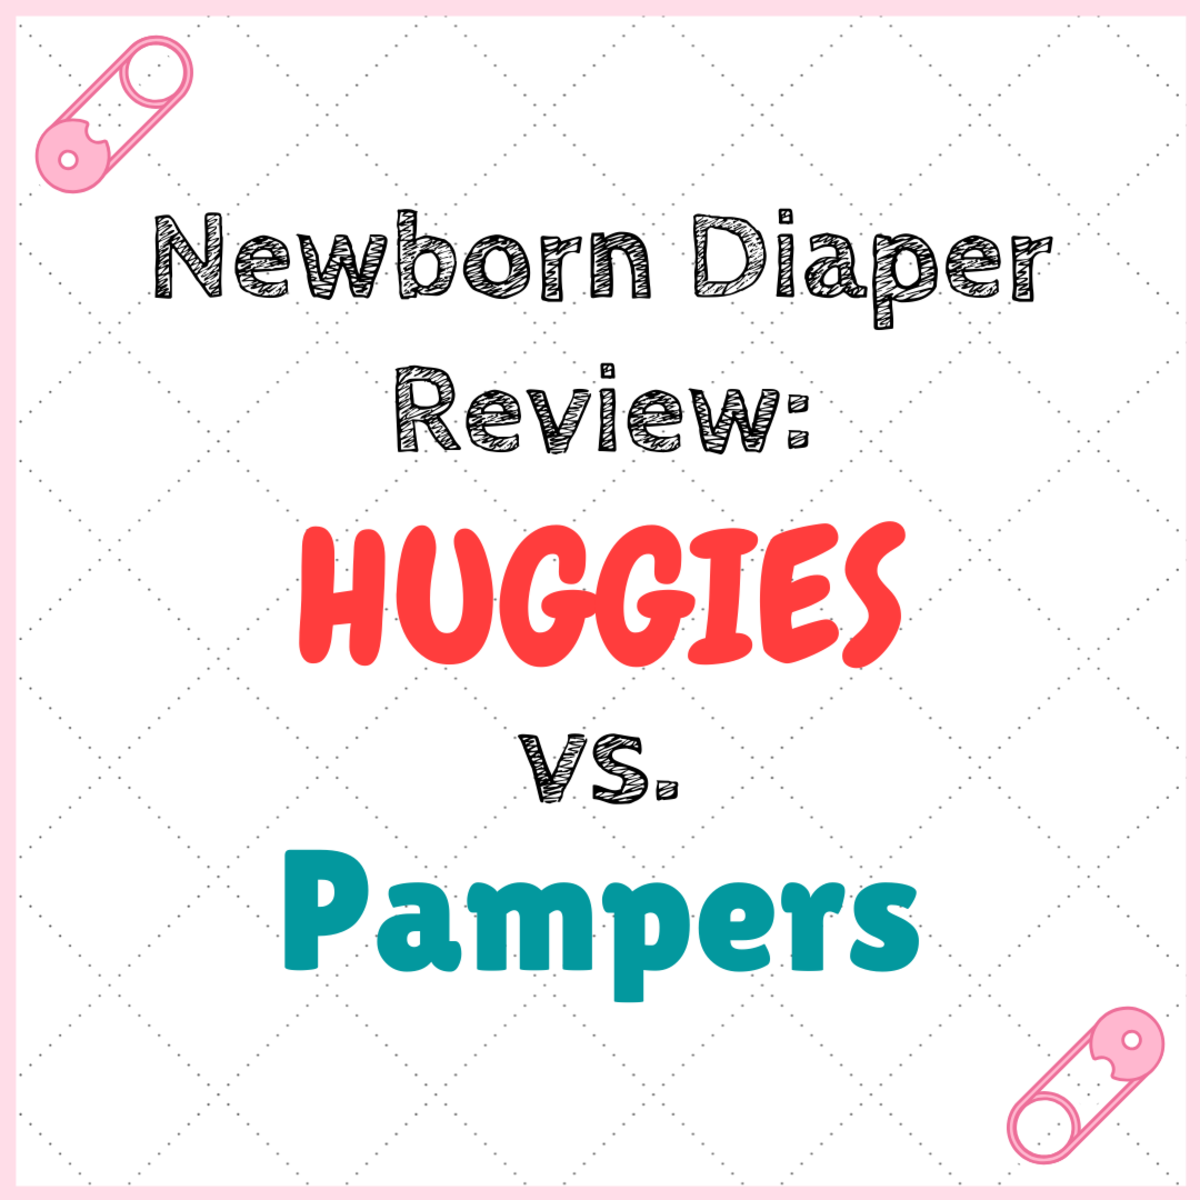 pampers parent company